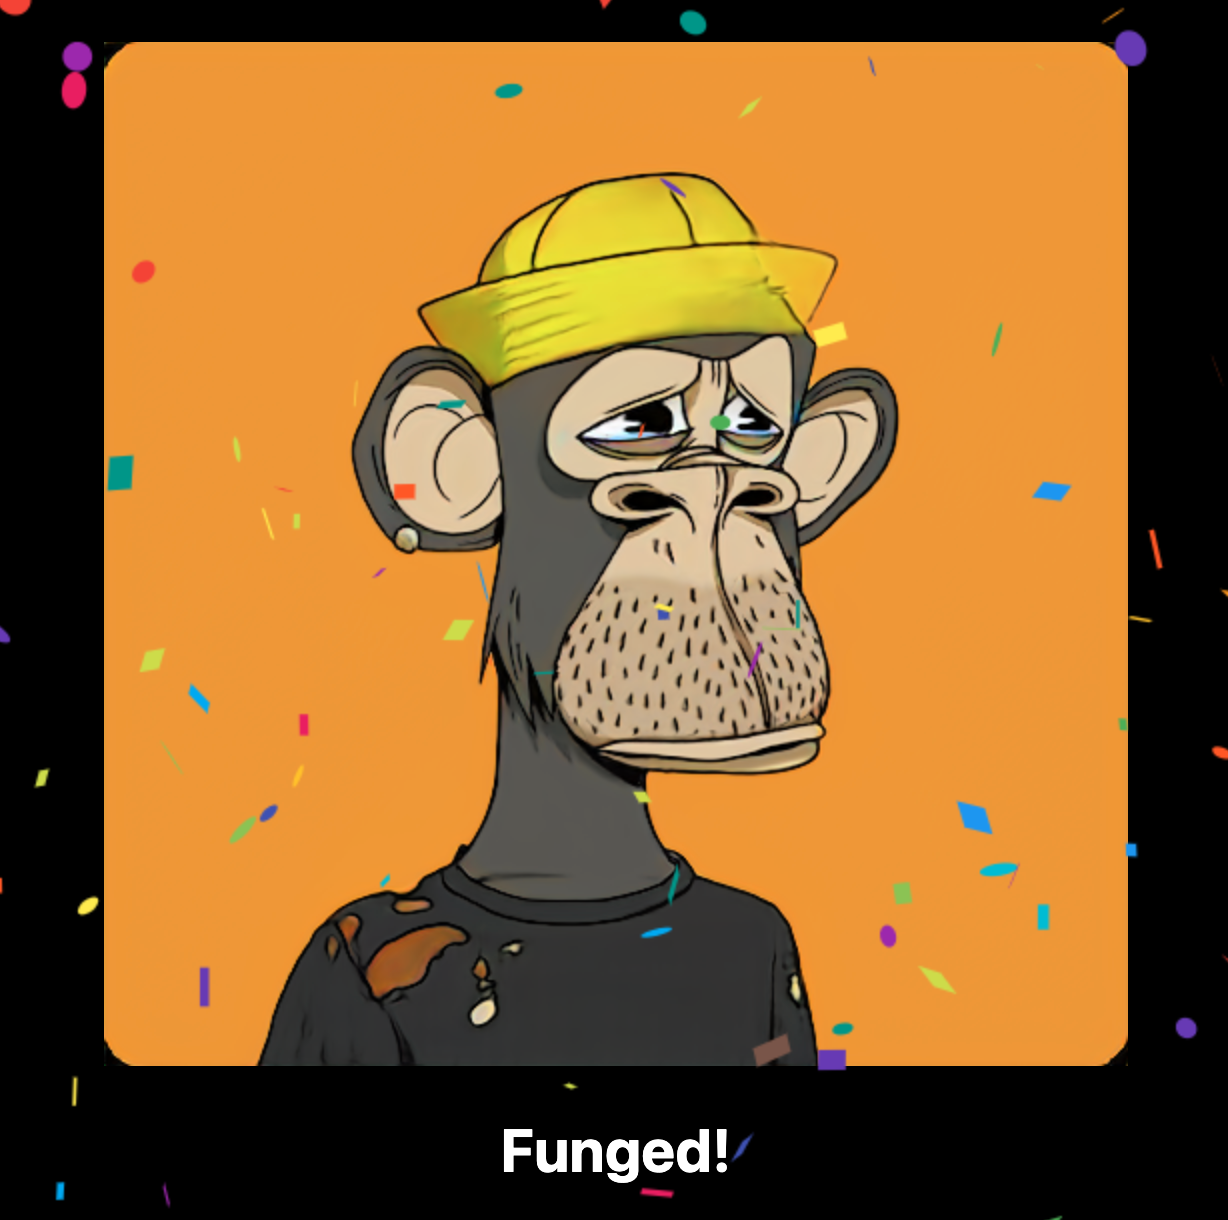 This AI generates Bored Apes that are unique, free - and totally fungible